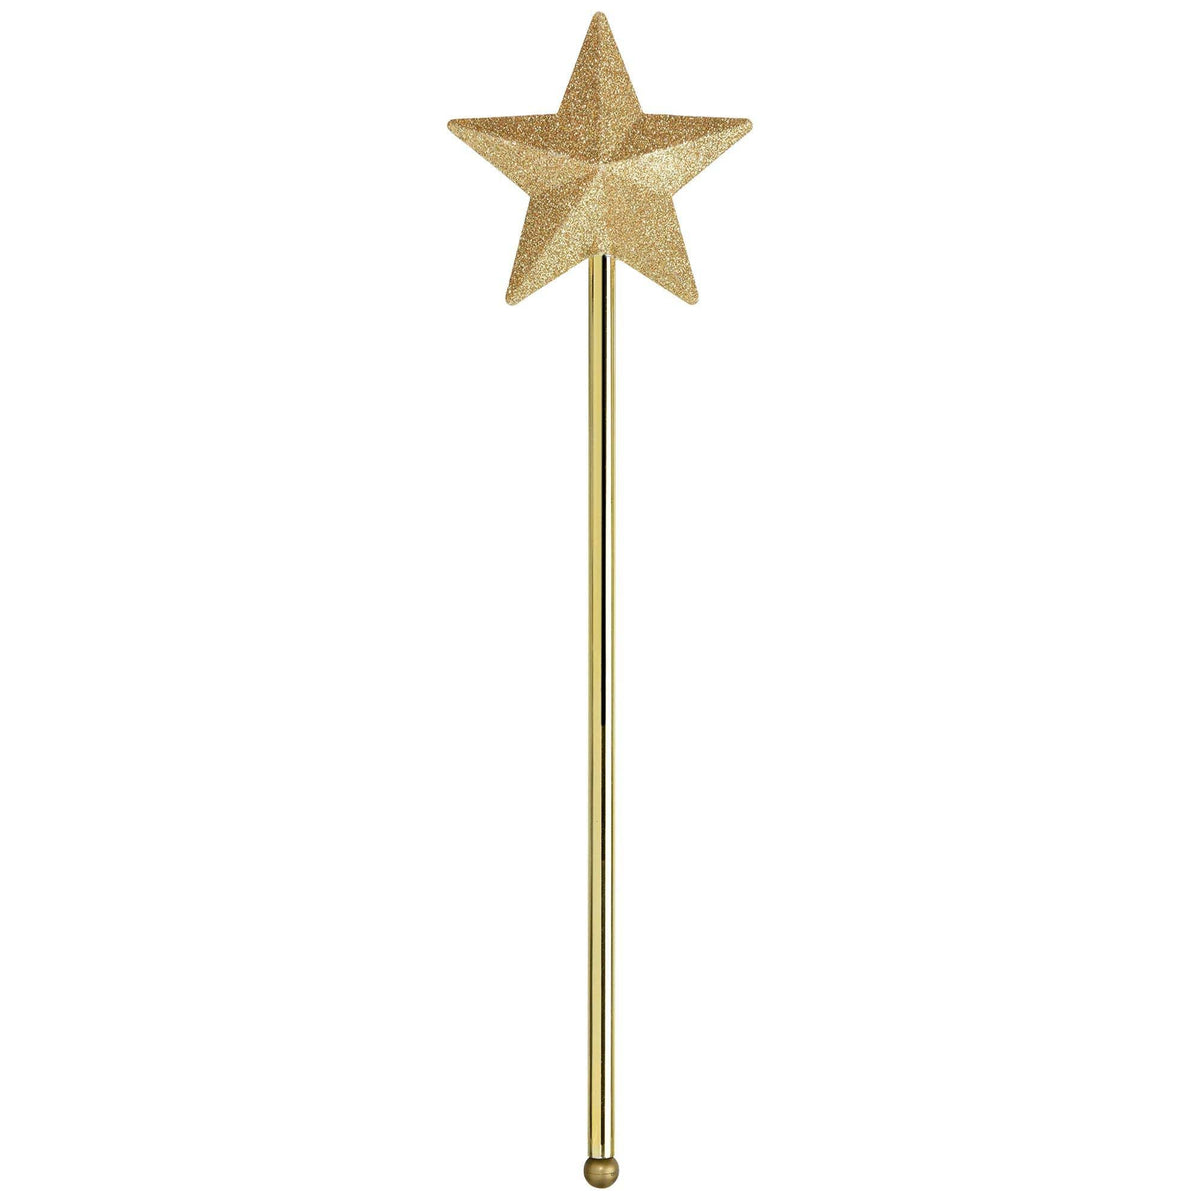 HALLOWEEN COSTUME CO. Costume Accessories Angel Gold Glitter Wand, 1 Count